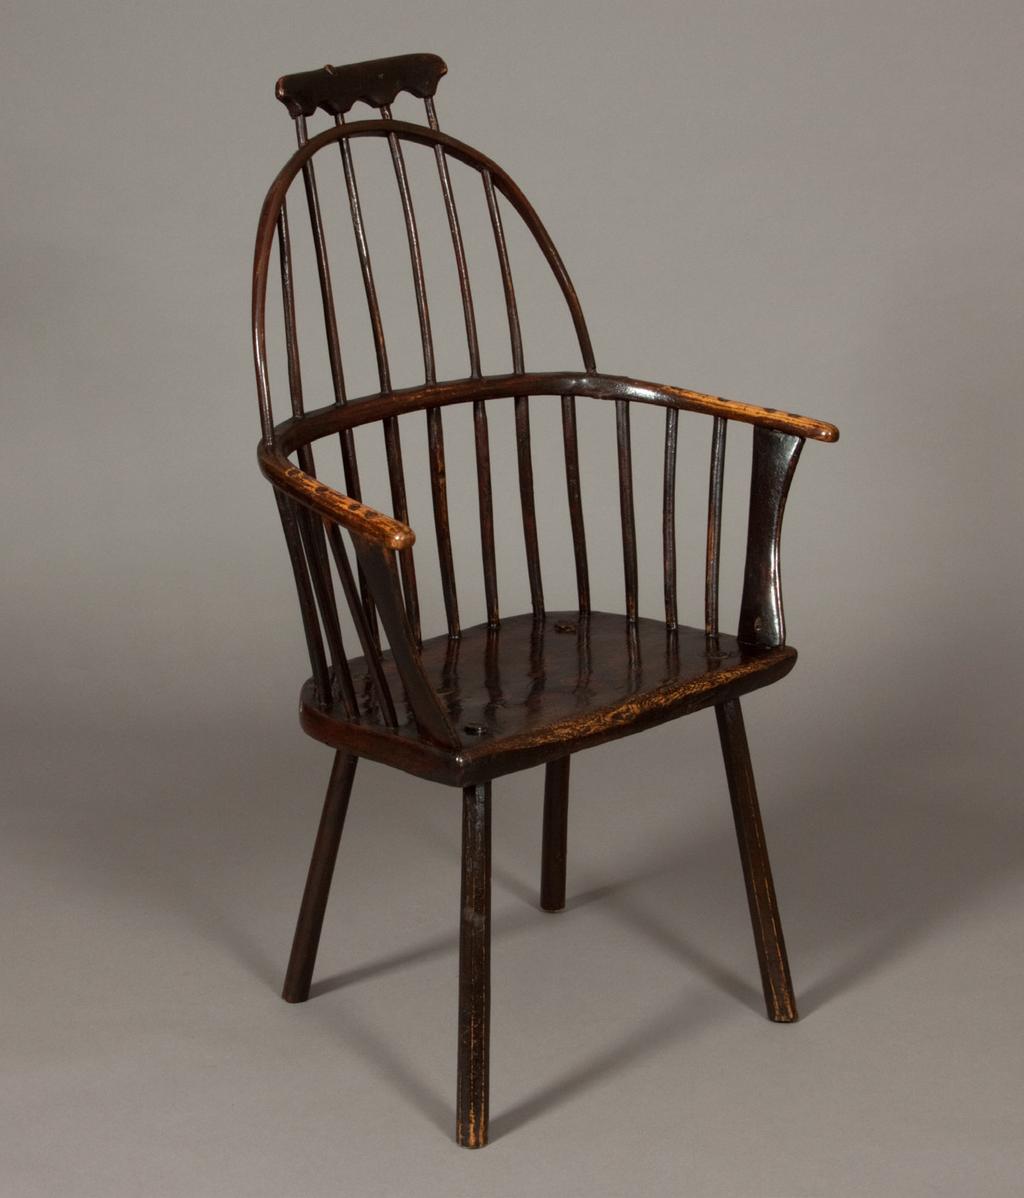 Circa 1780 Provenance: This chair has been in the same Carmarthenshire family since at least the 1940 s which suggests a possible Welsh origin, although in The English Windsor Chair by Thomas Crispin